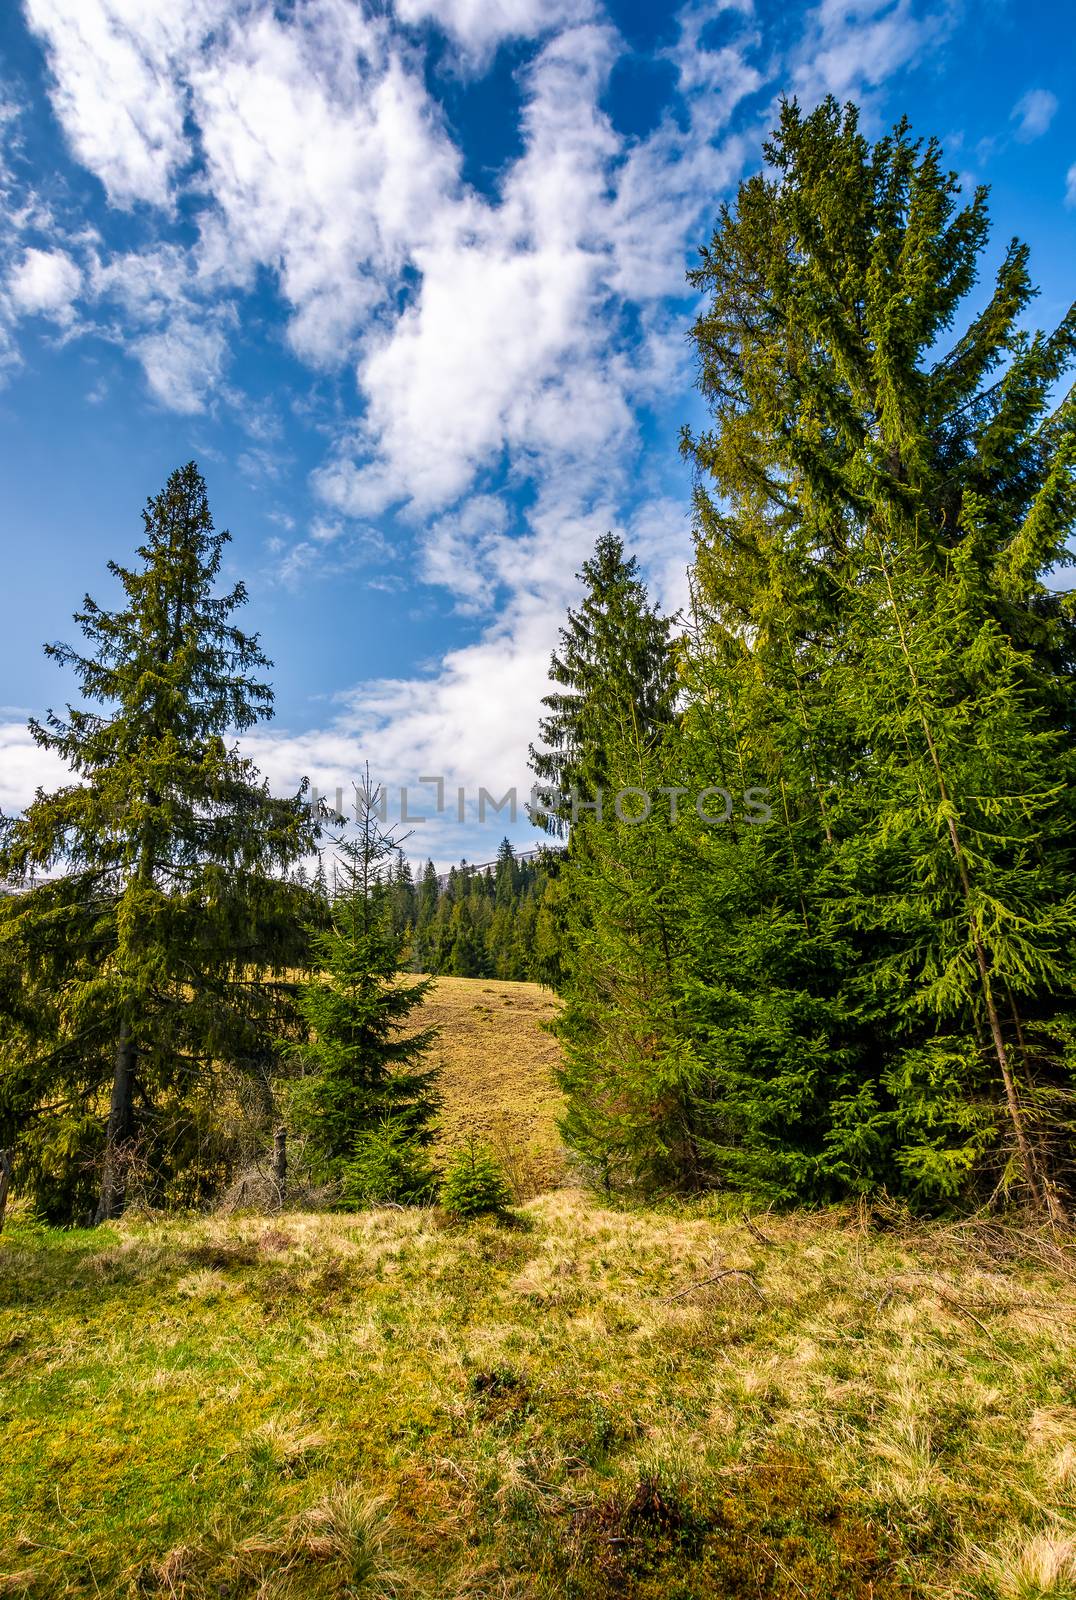 spruce forest in springtime landscape by Pellinni